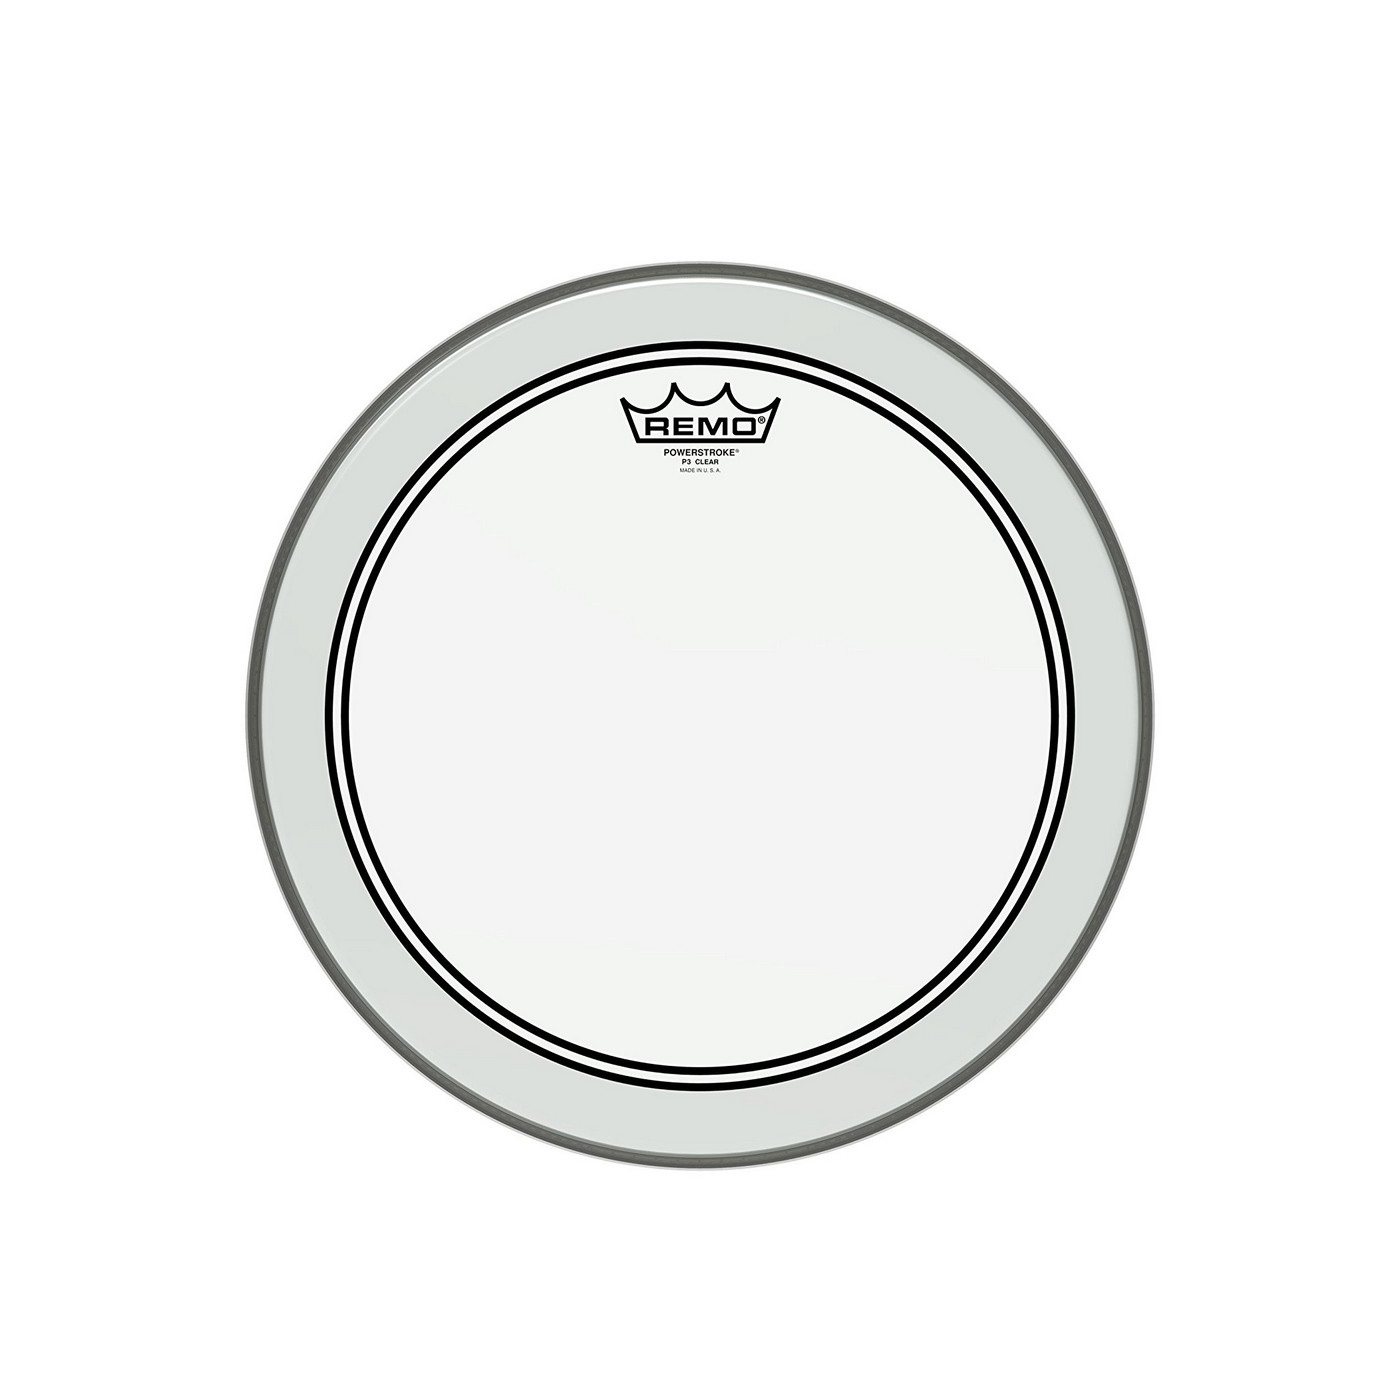 Remo Powerstroke 3 14 inch Clear Drum Head (P3-0314-BP)